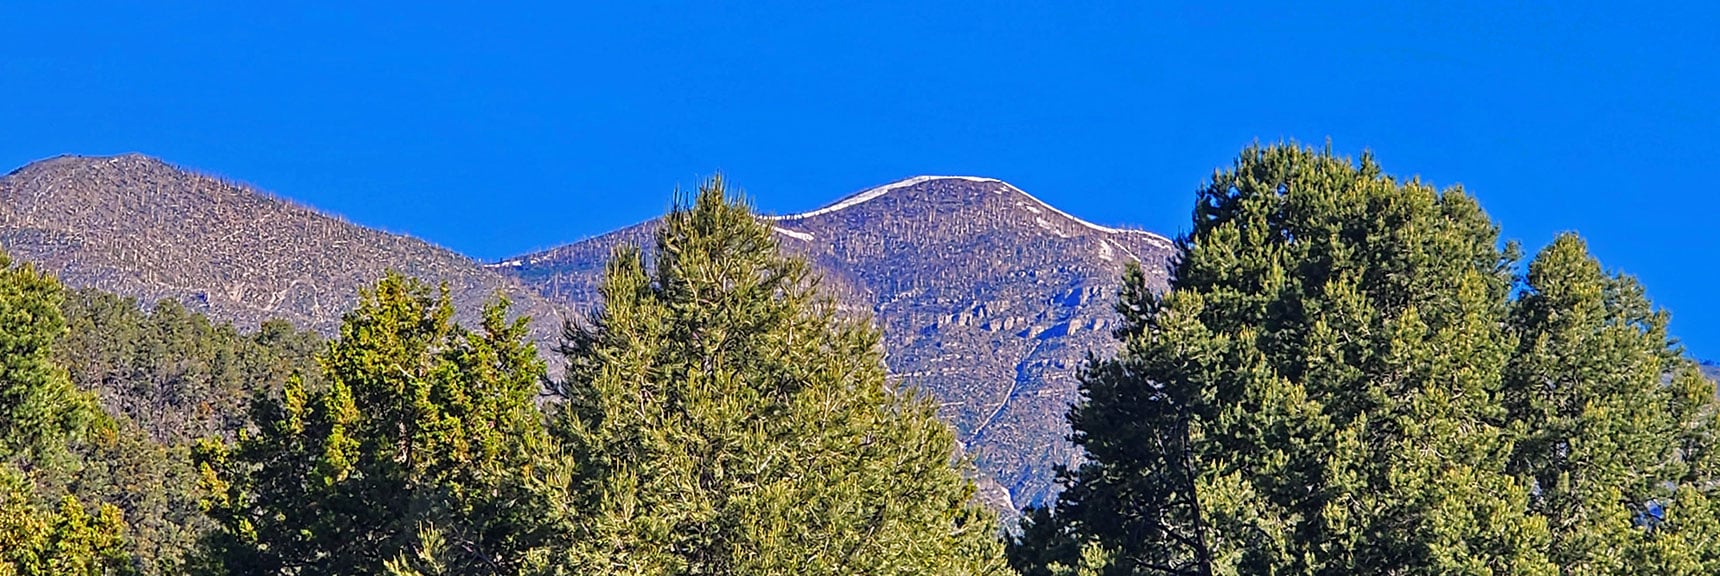 Griffith Peak Visible from Upper End of Lovell Canyon Road. | Wilson Ridge South High Point | Lovell Canyon, Nevada